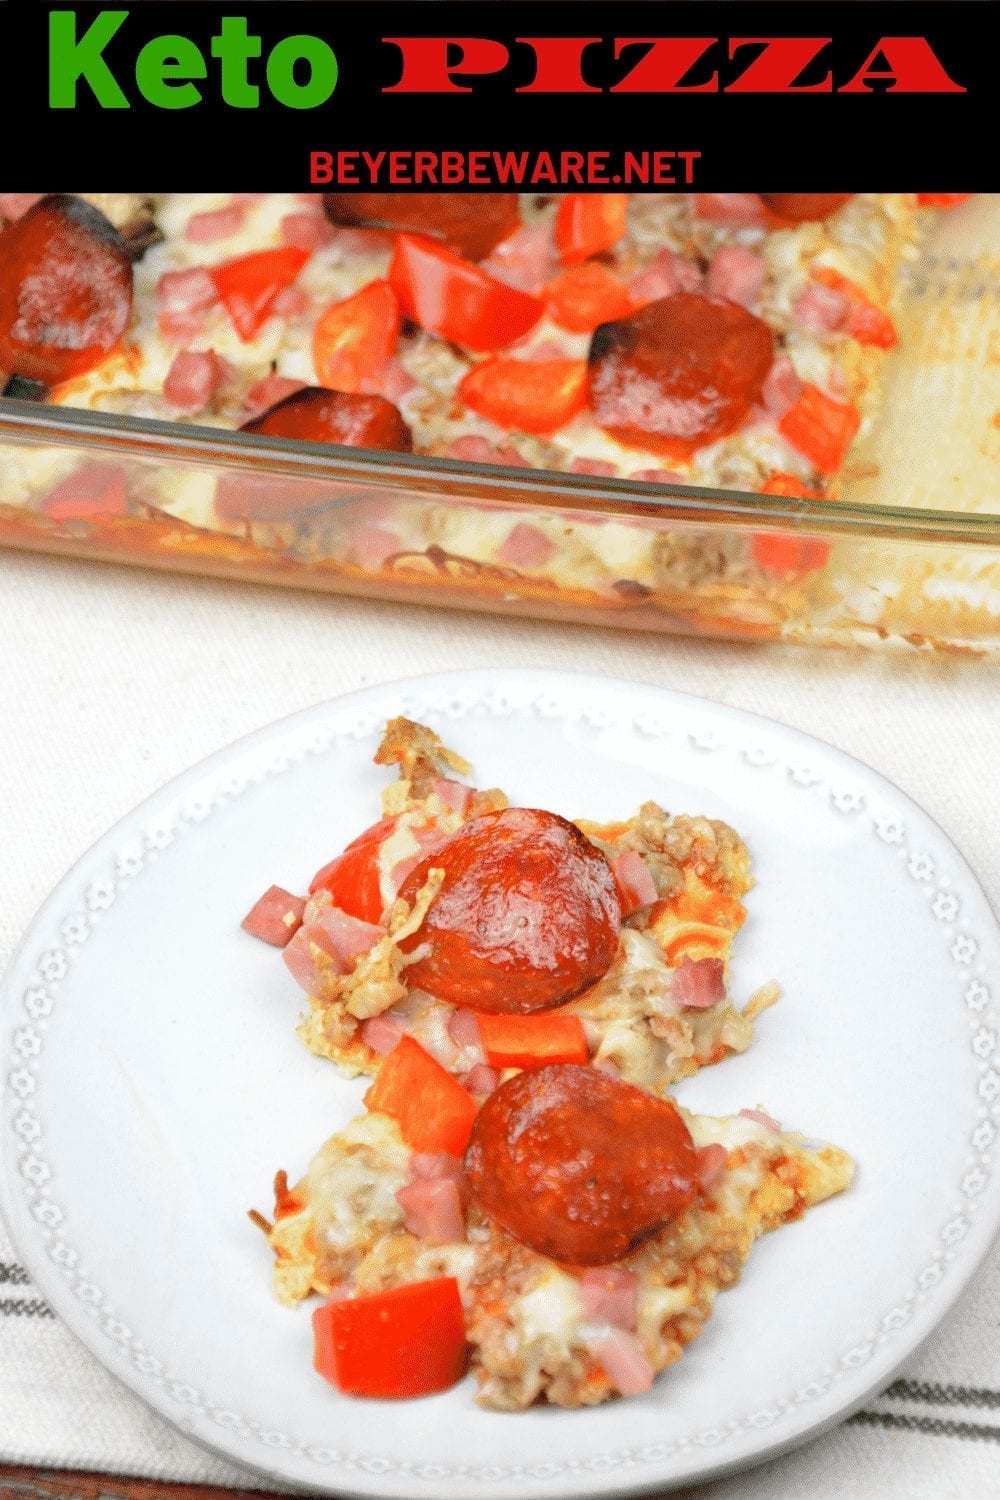 Keto pizza made with a cream cheese crust and topped with a thin layer of tomato sauce, your favorite toppings, and cheese. #Keto #LowCarb #Pizza #KetoPizza #LowCarbCrust